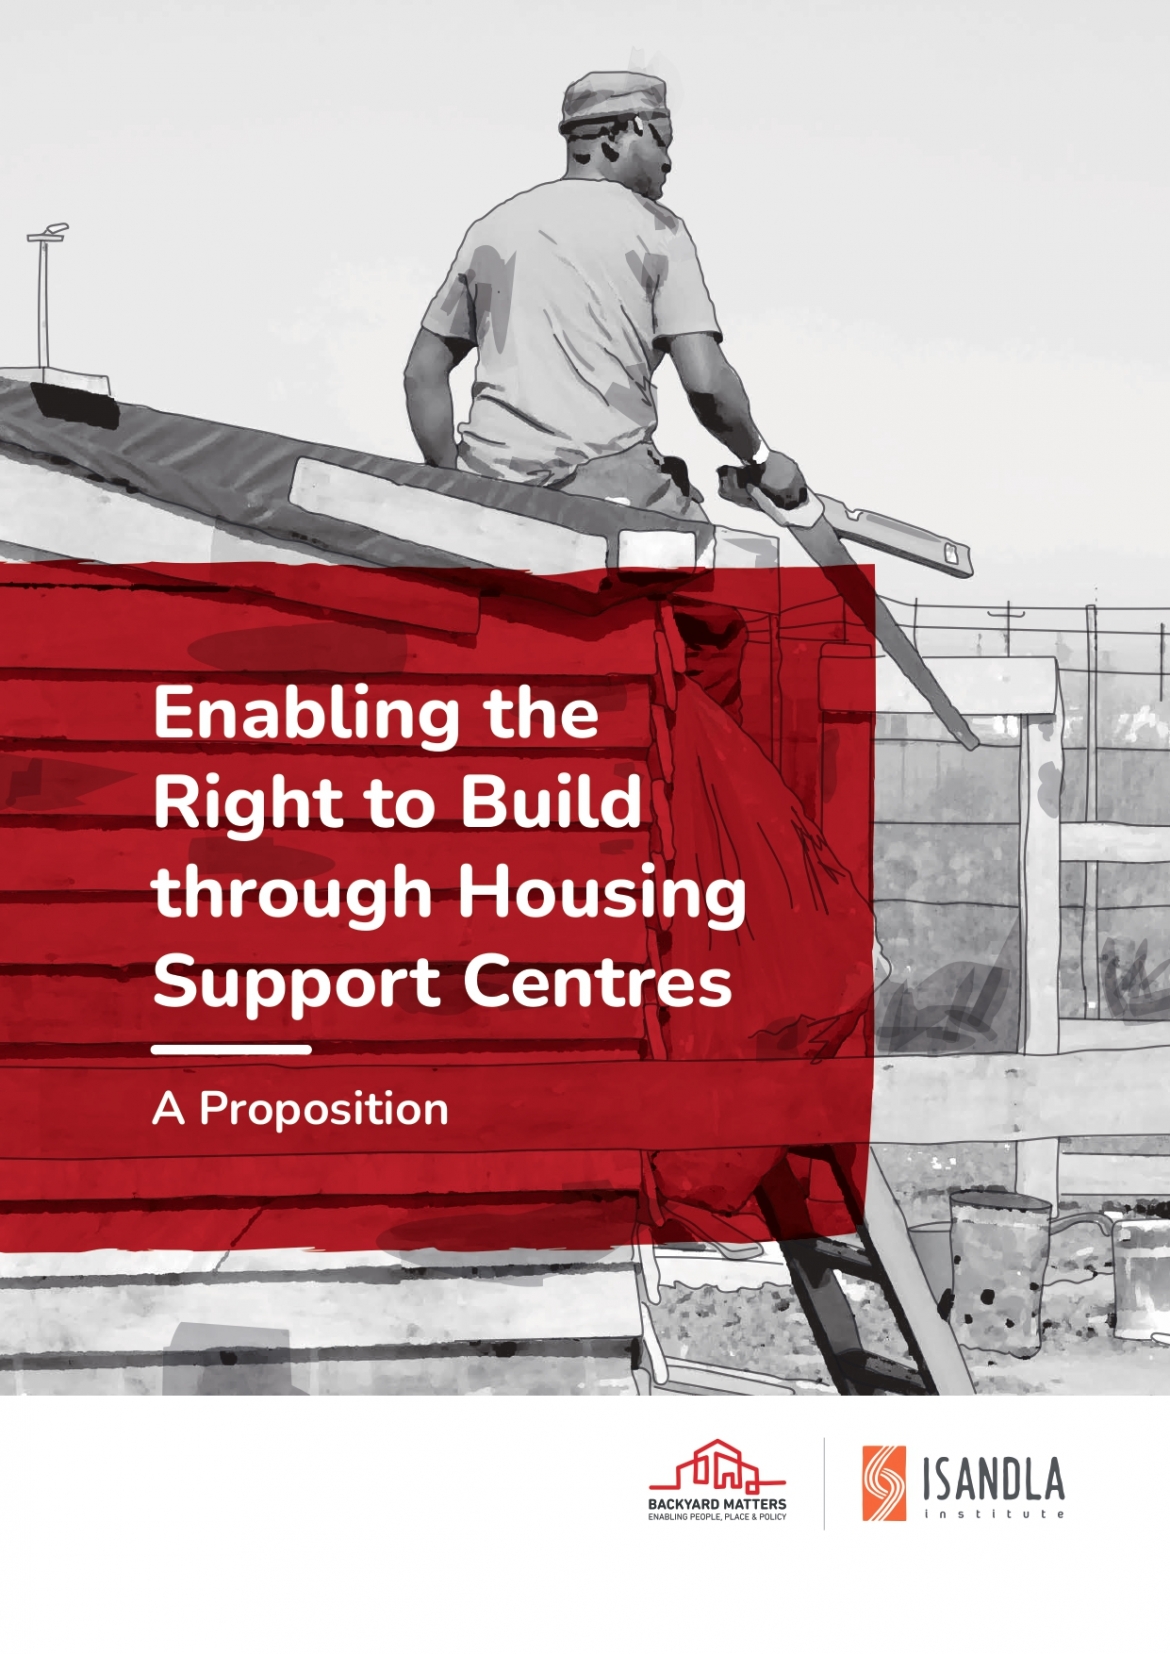 Enabling the Right to Build through Housing Support Centres (proposition paper)